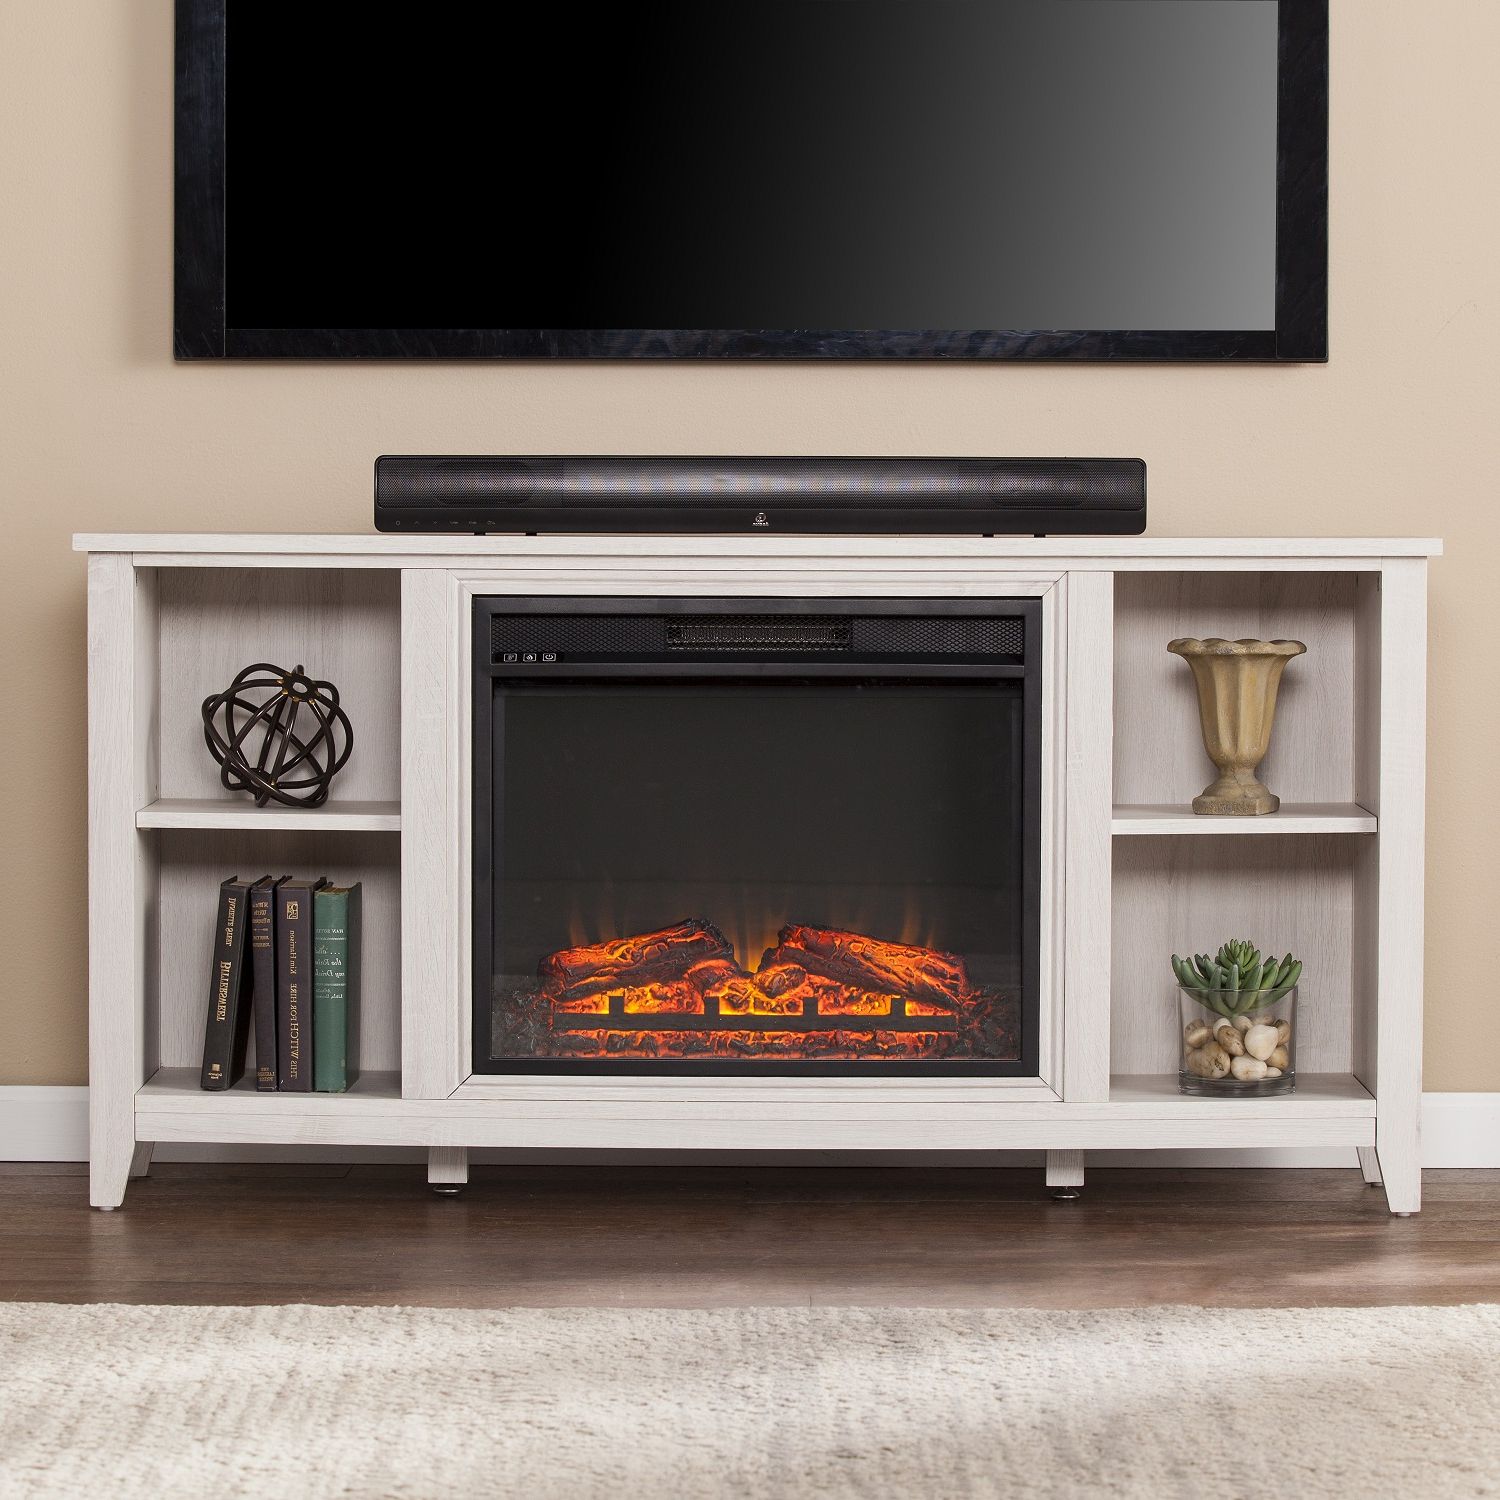 Most Popular Electric Fireplace Tv Stands Pertaining To 55 1/2" Parkdale Electric Fireplace Tv Stand – White (View 11 of 15)